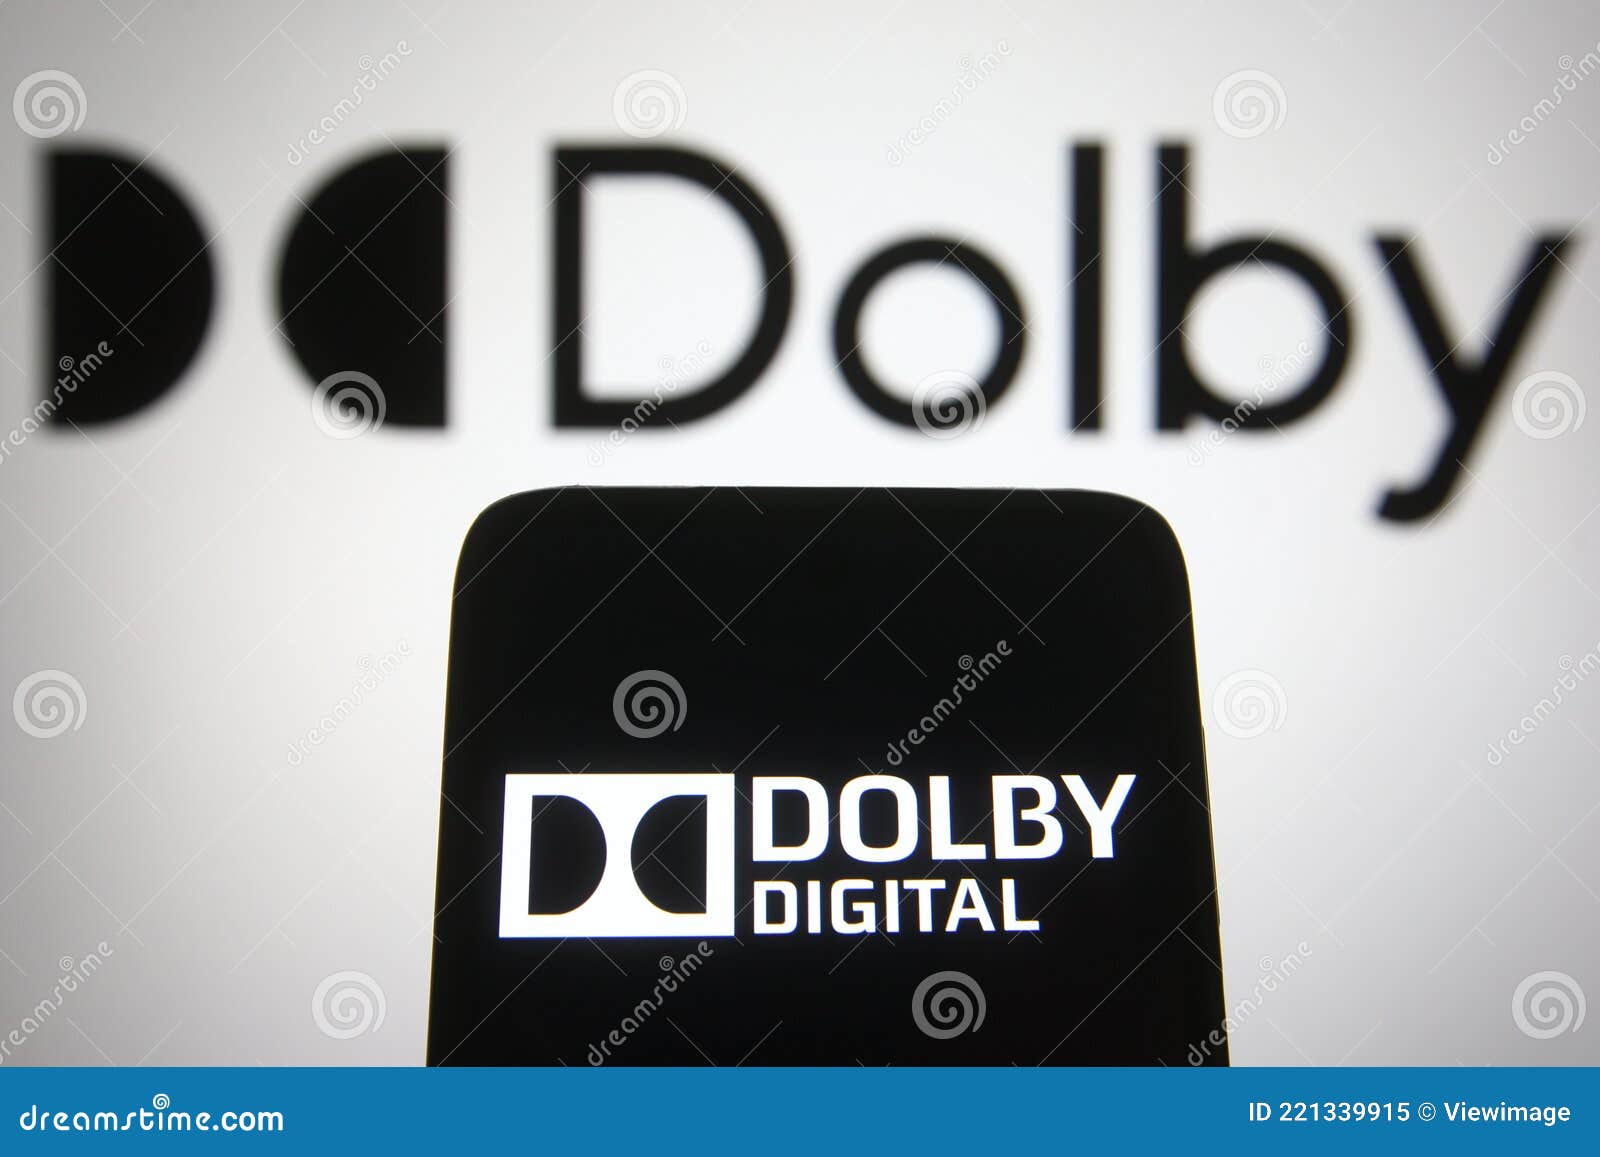 Dvd technology logo Black and White Stock Photos & Images - Alamy